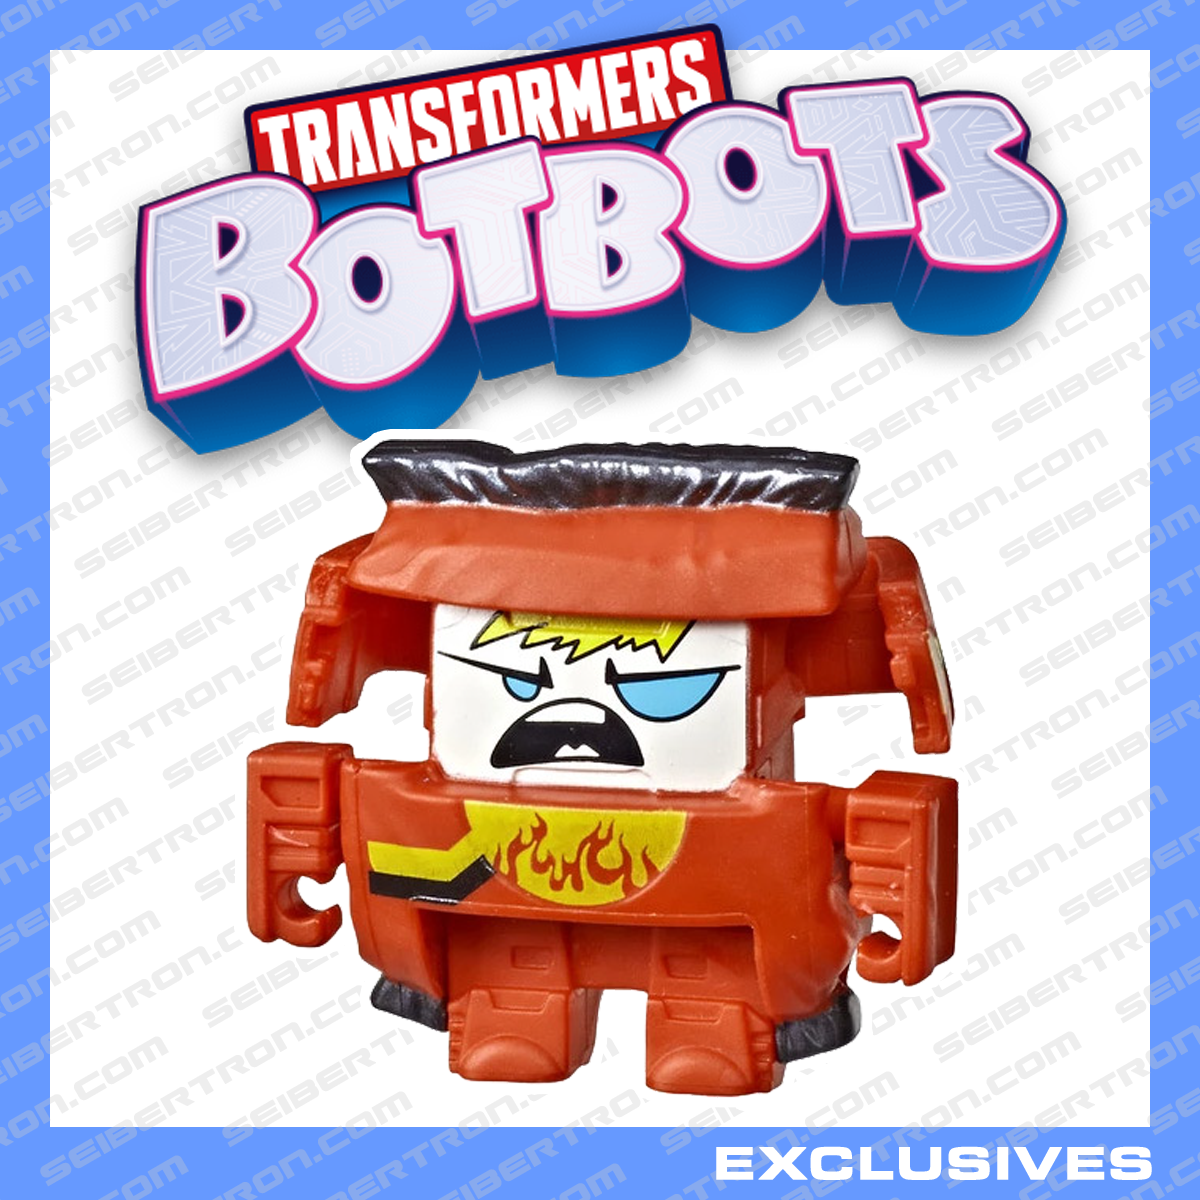 HAL A PENO Transformers BotBots Con Crew Fantastic Fuelers bag spicy chips 2019